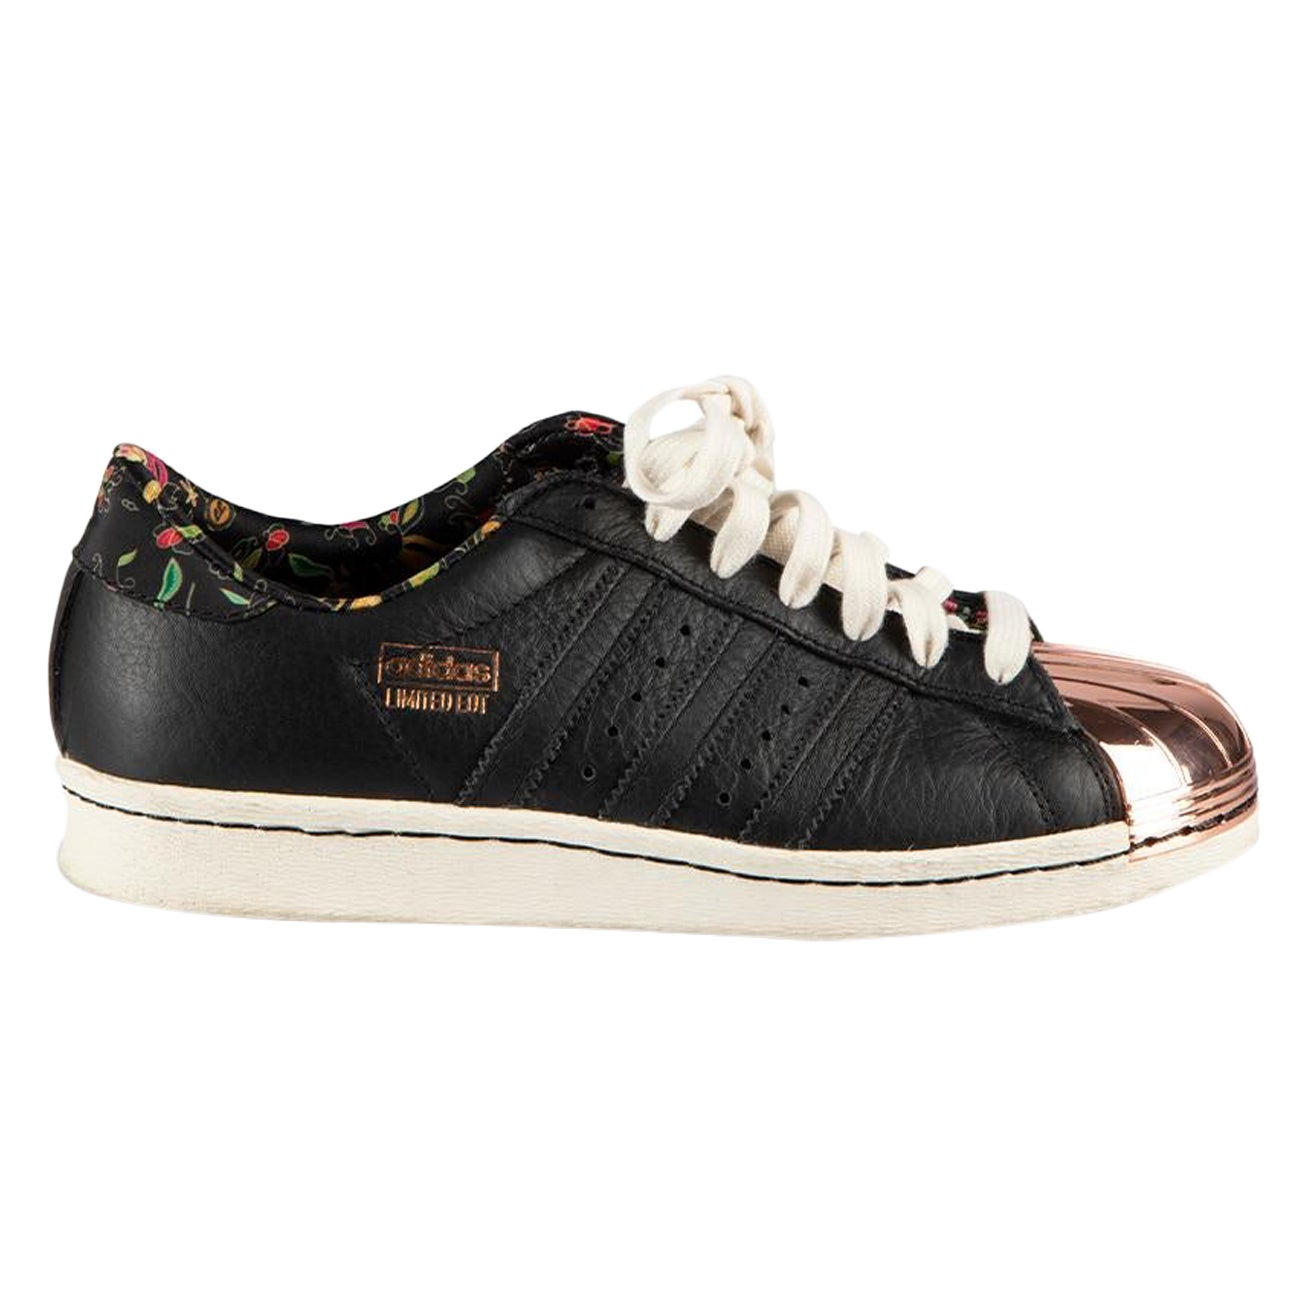 Adidas Adidas x Limited EDT Black Leather Superstar 80v Trainers Size UK 4 For Sale